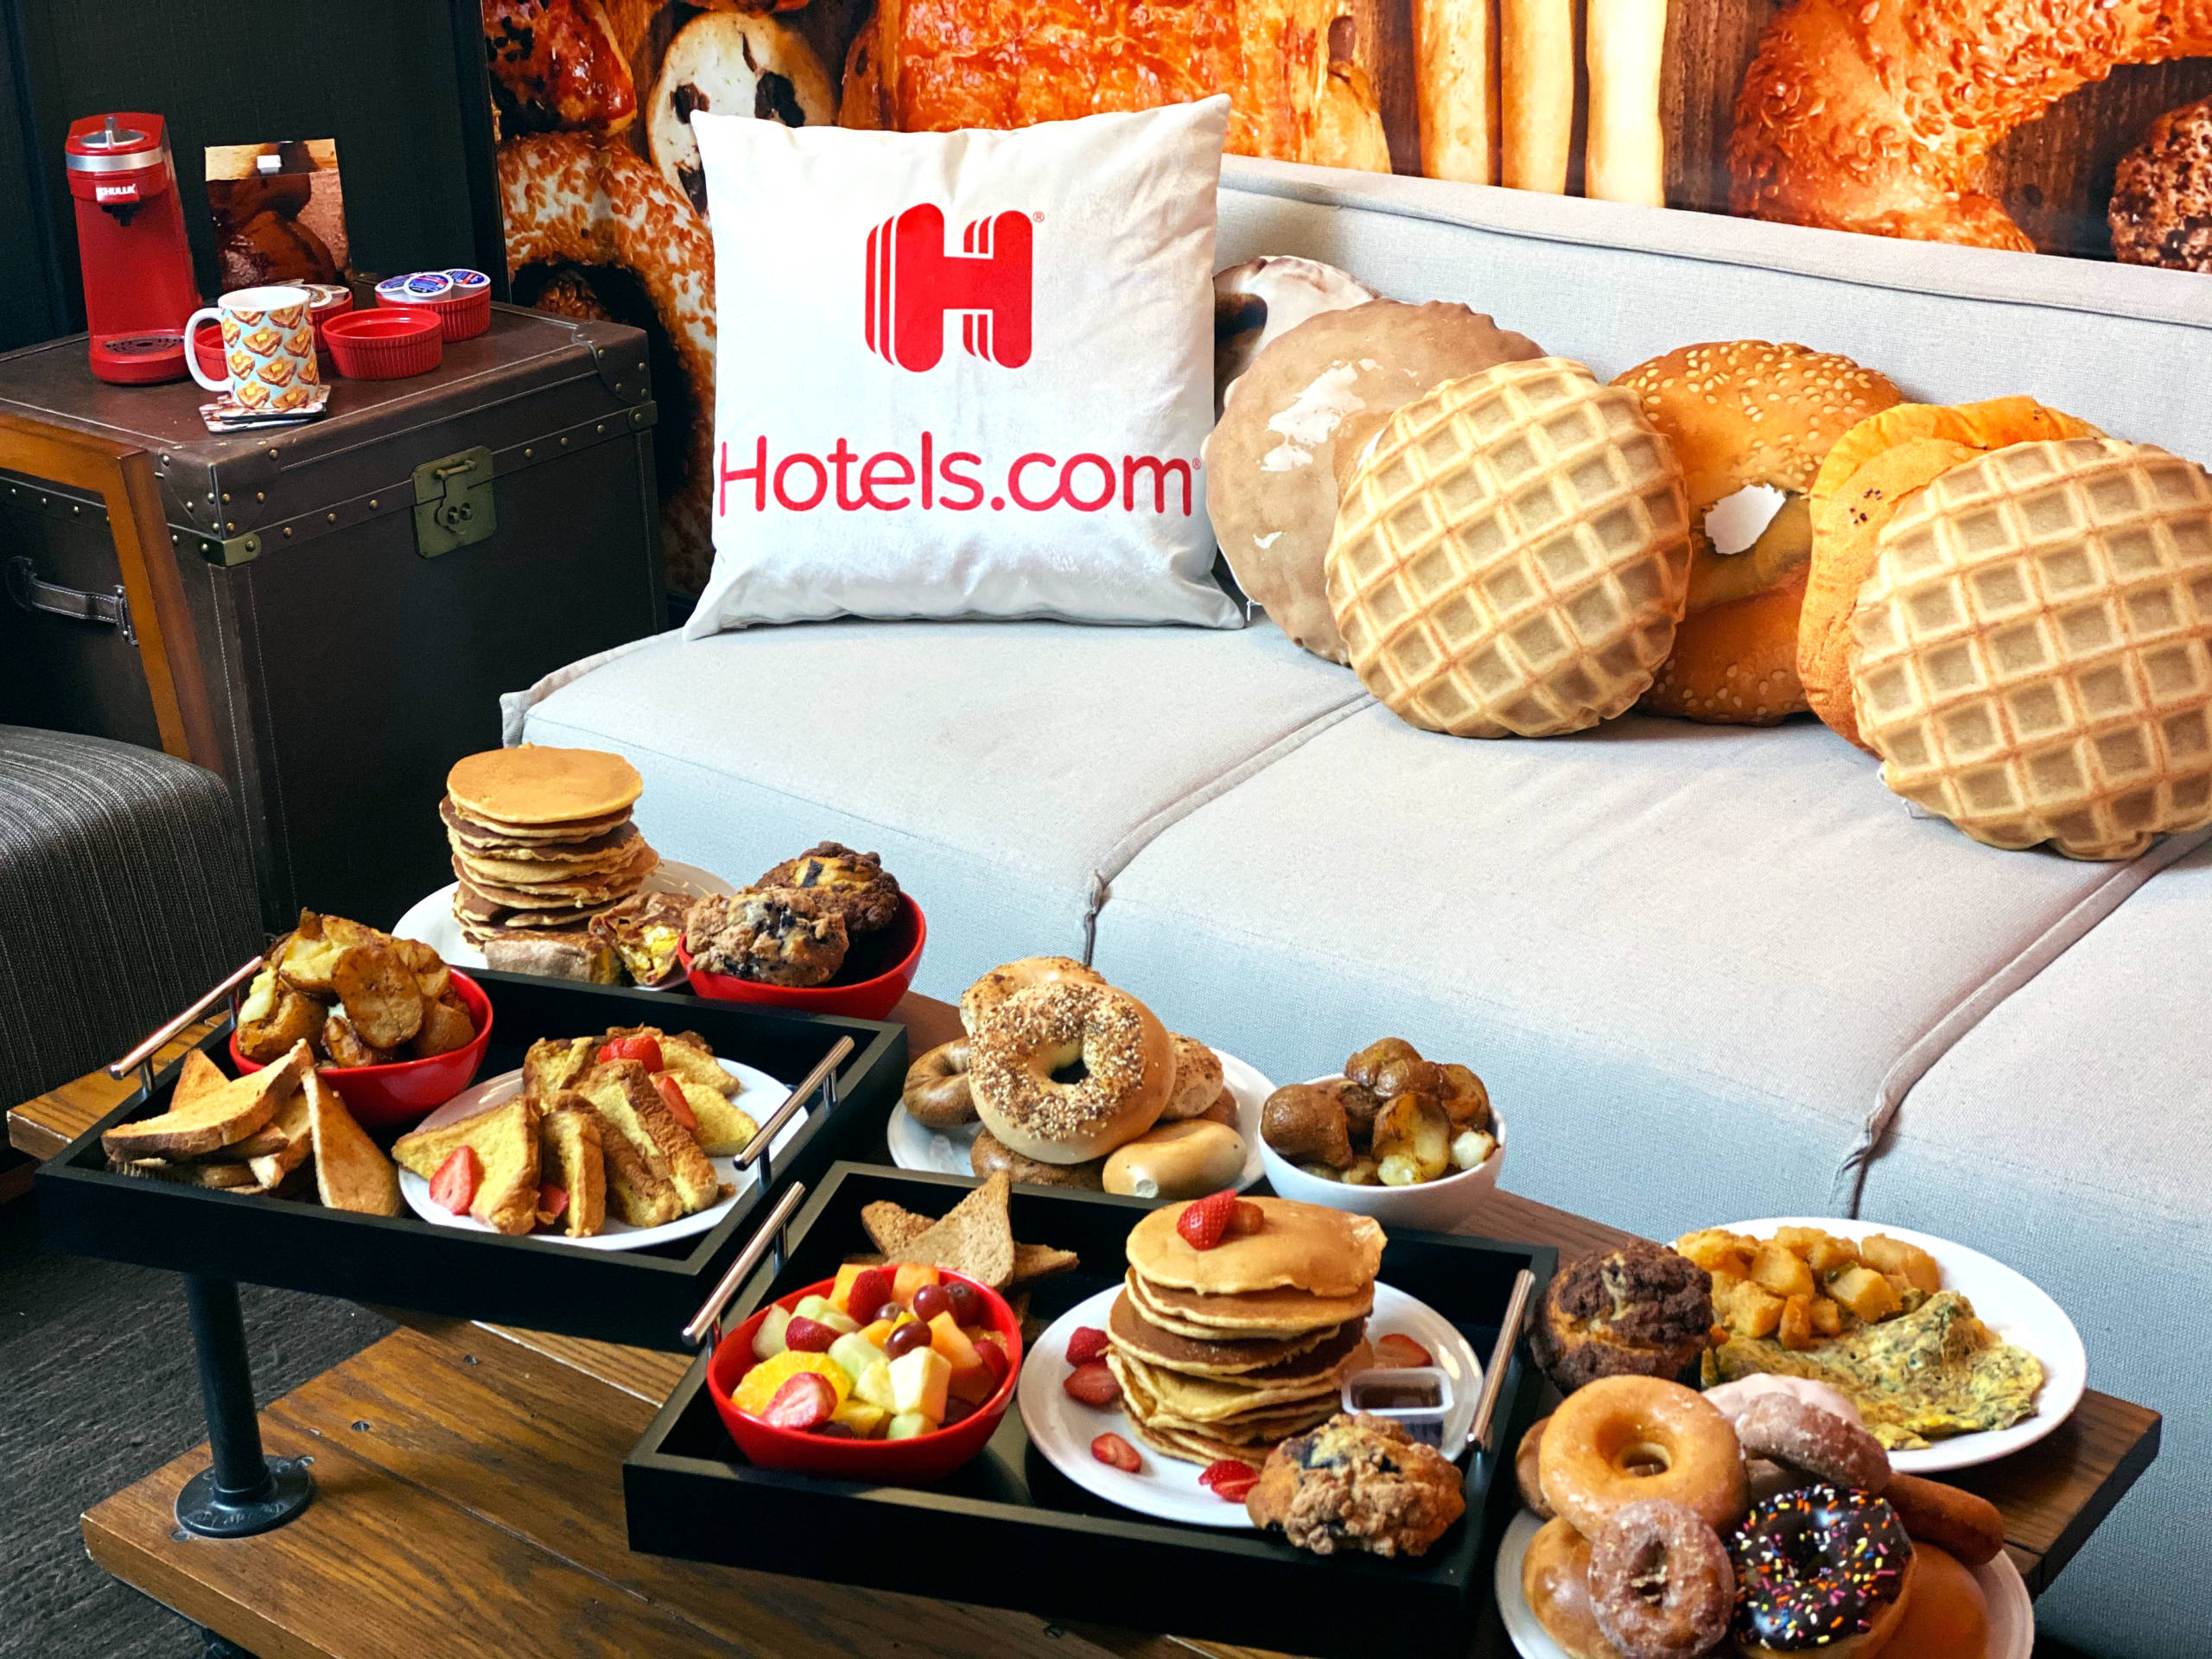 Bread and Breakfast: This carb-themed hotel will put you in a food coma